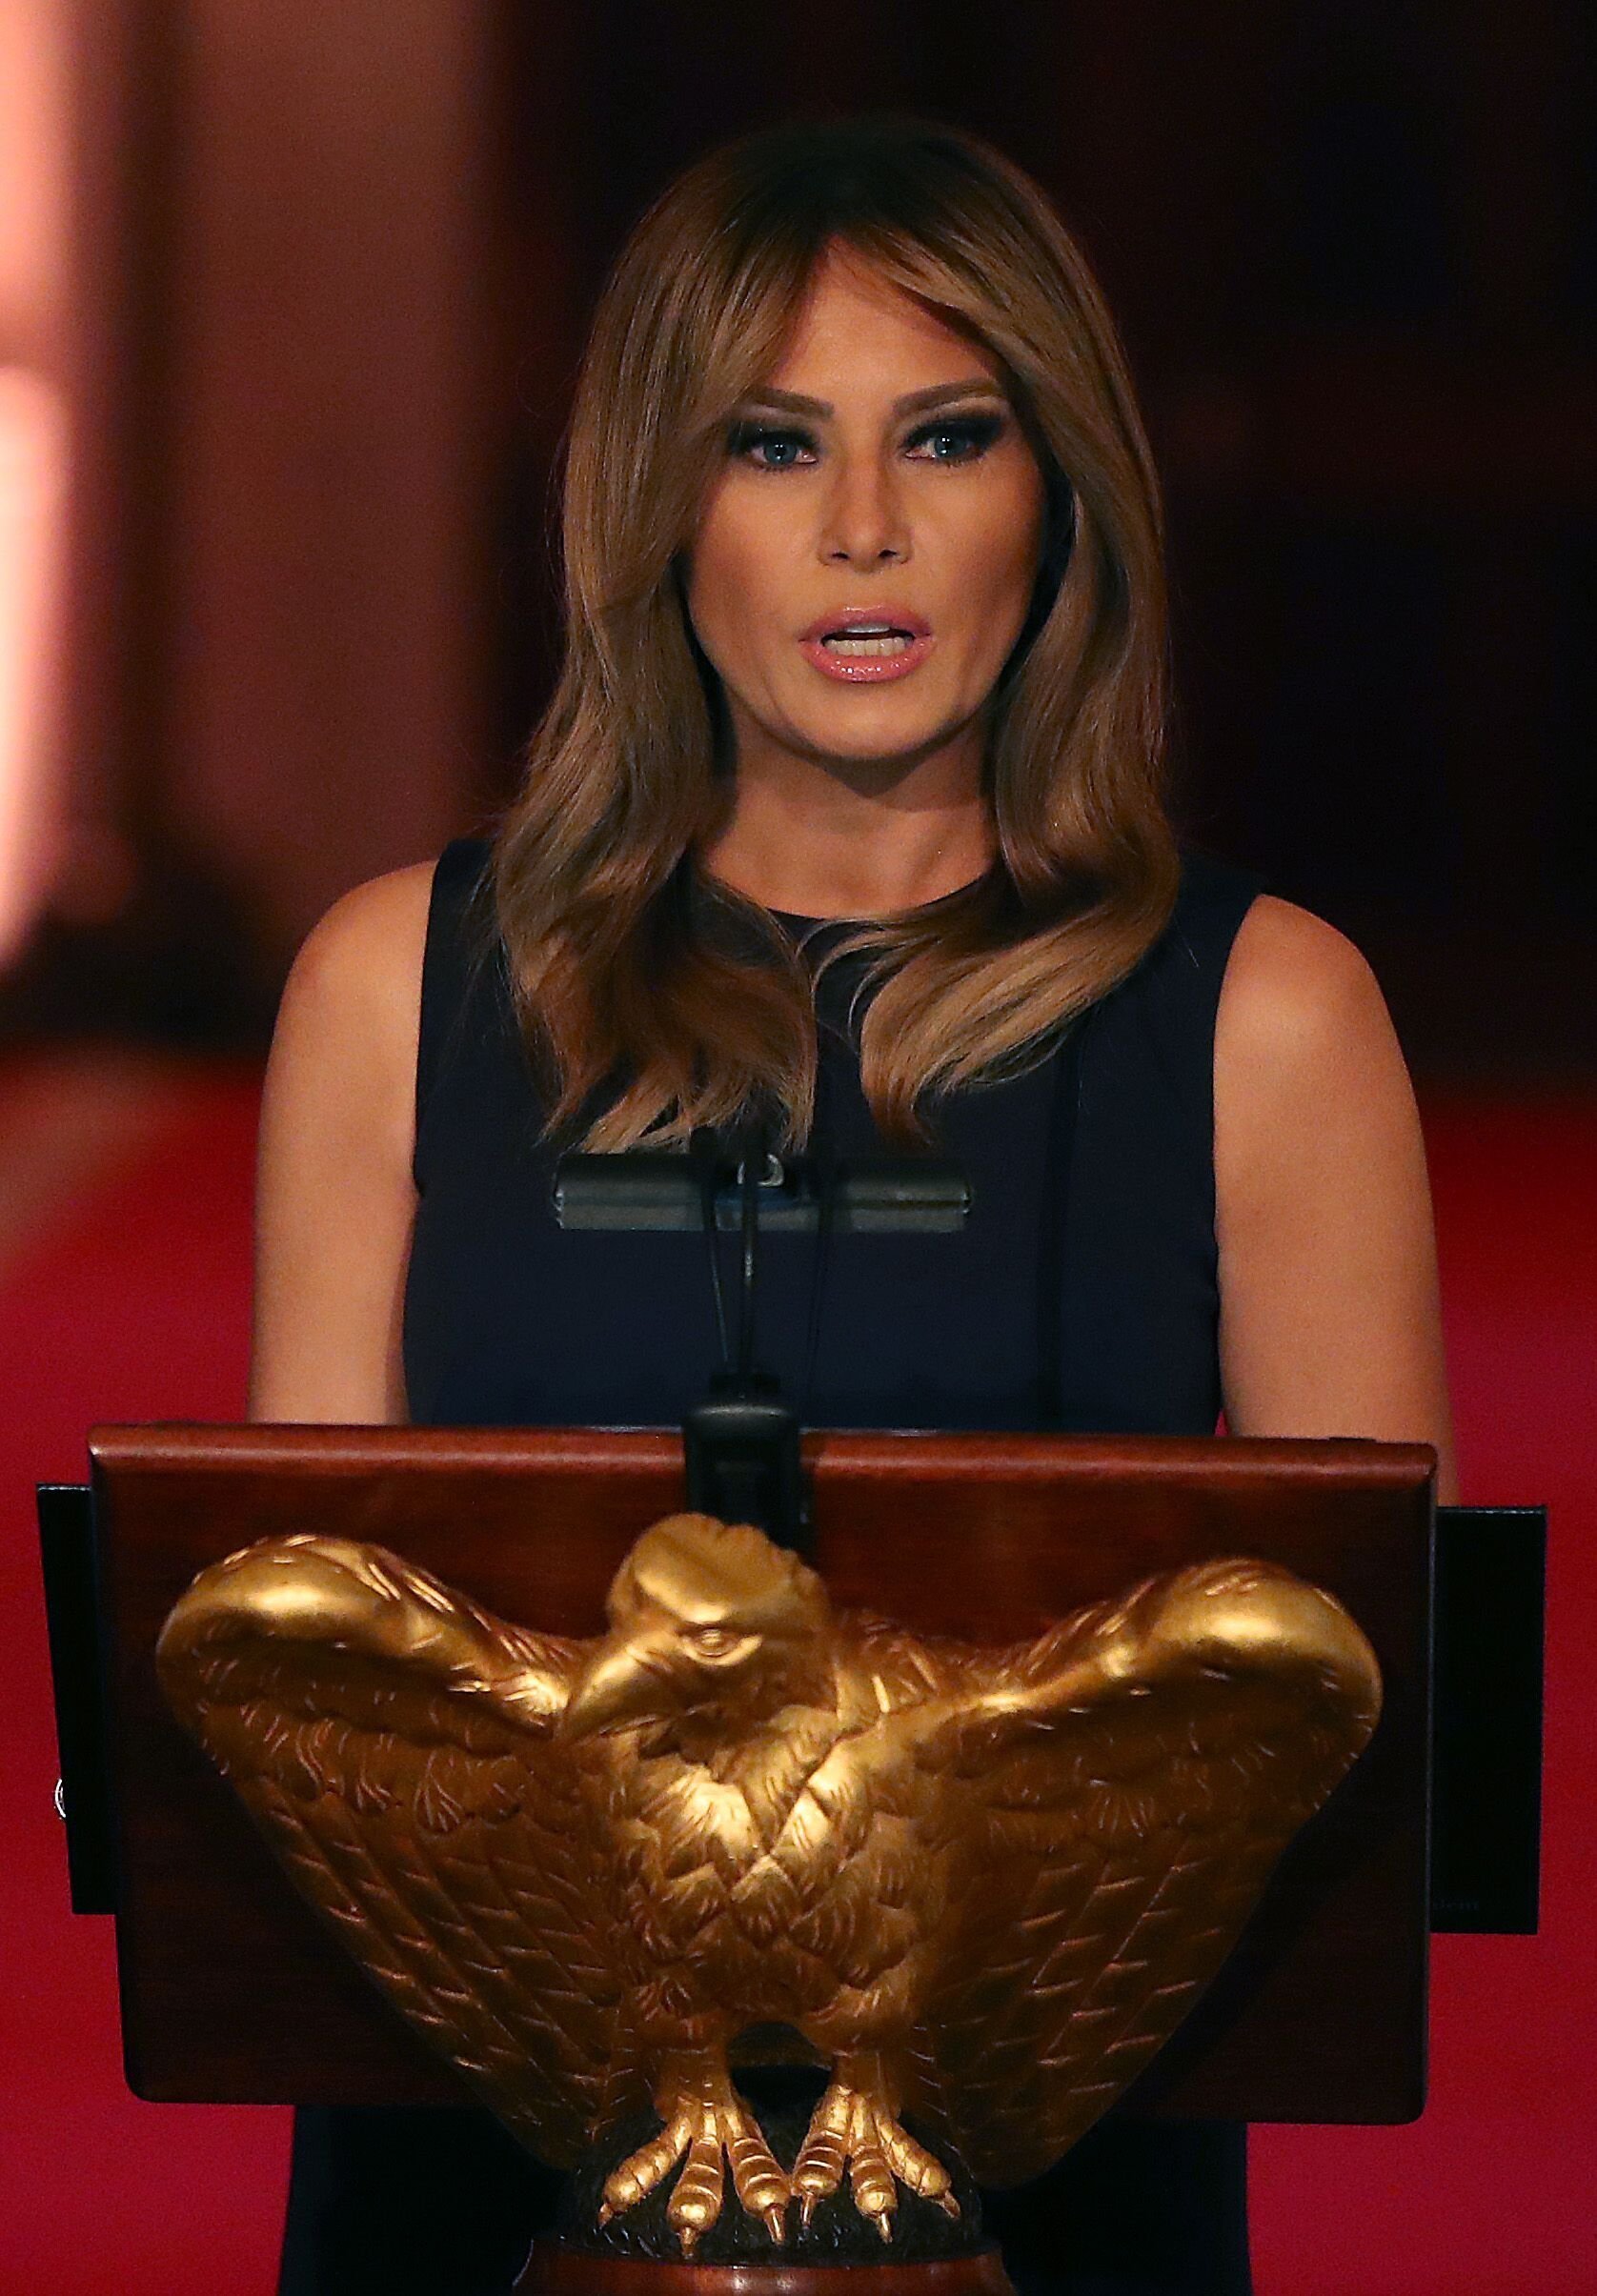 First lady Melania Trump speaks during the White House Historical Association Dinner in the East Room of the White House on May 15, 2019 in Washington, DC | Photo: Getty Images